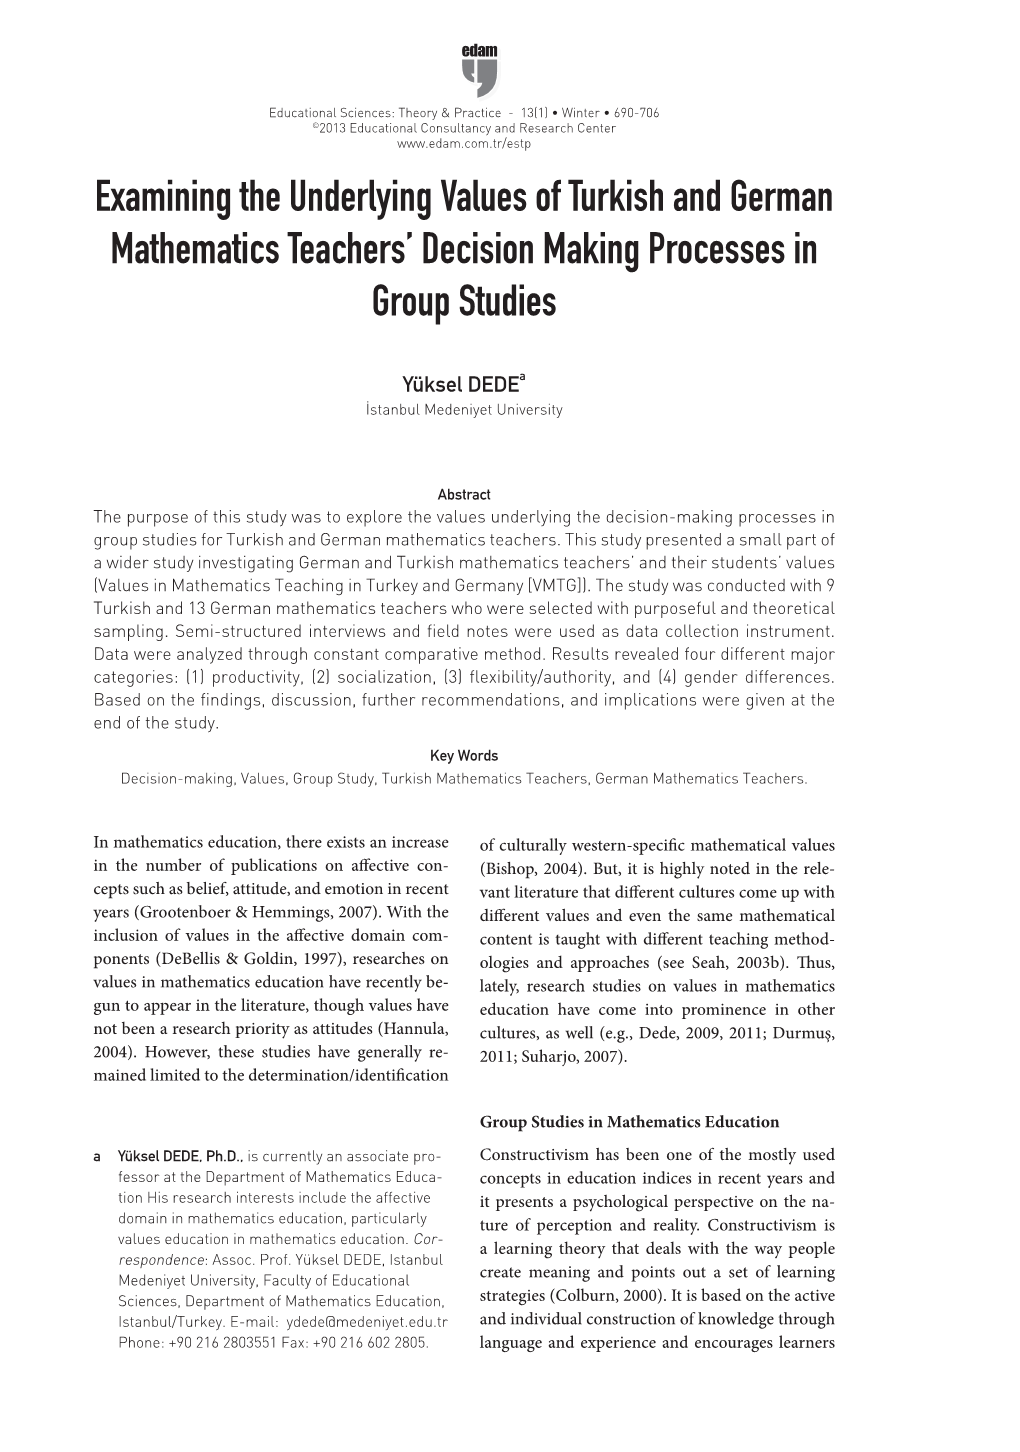 Examining the Underlying Values of Turkish and German Mathematics Teachers' Decision Making Processes in Group Studies